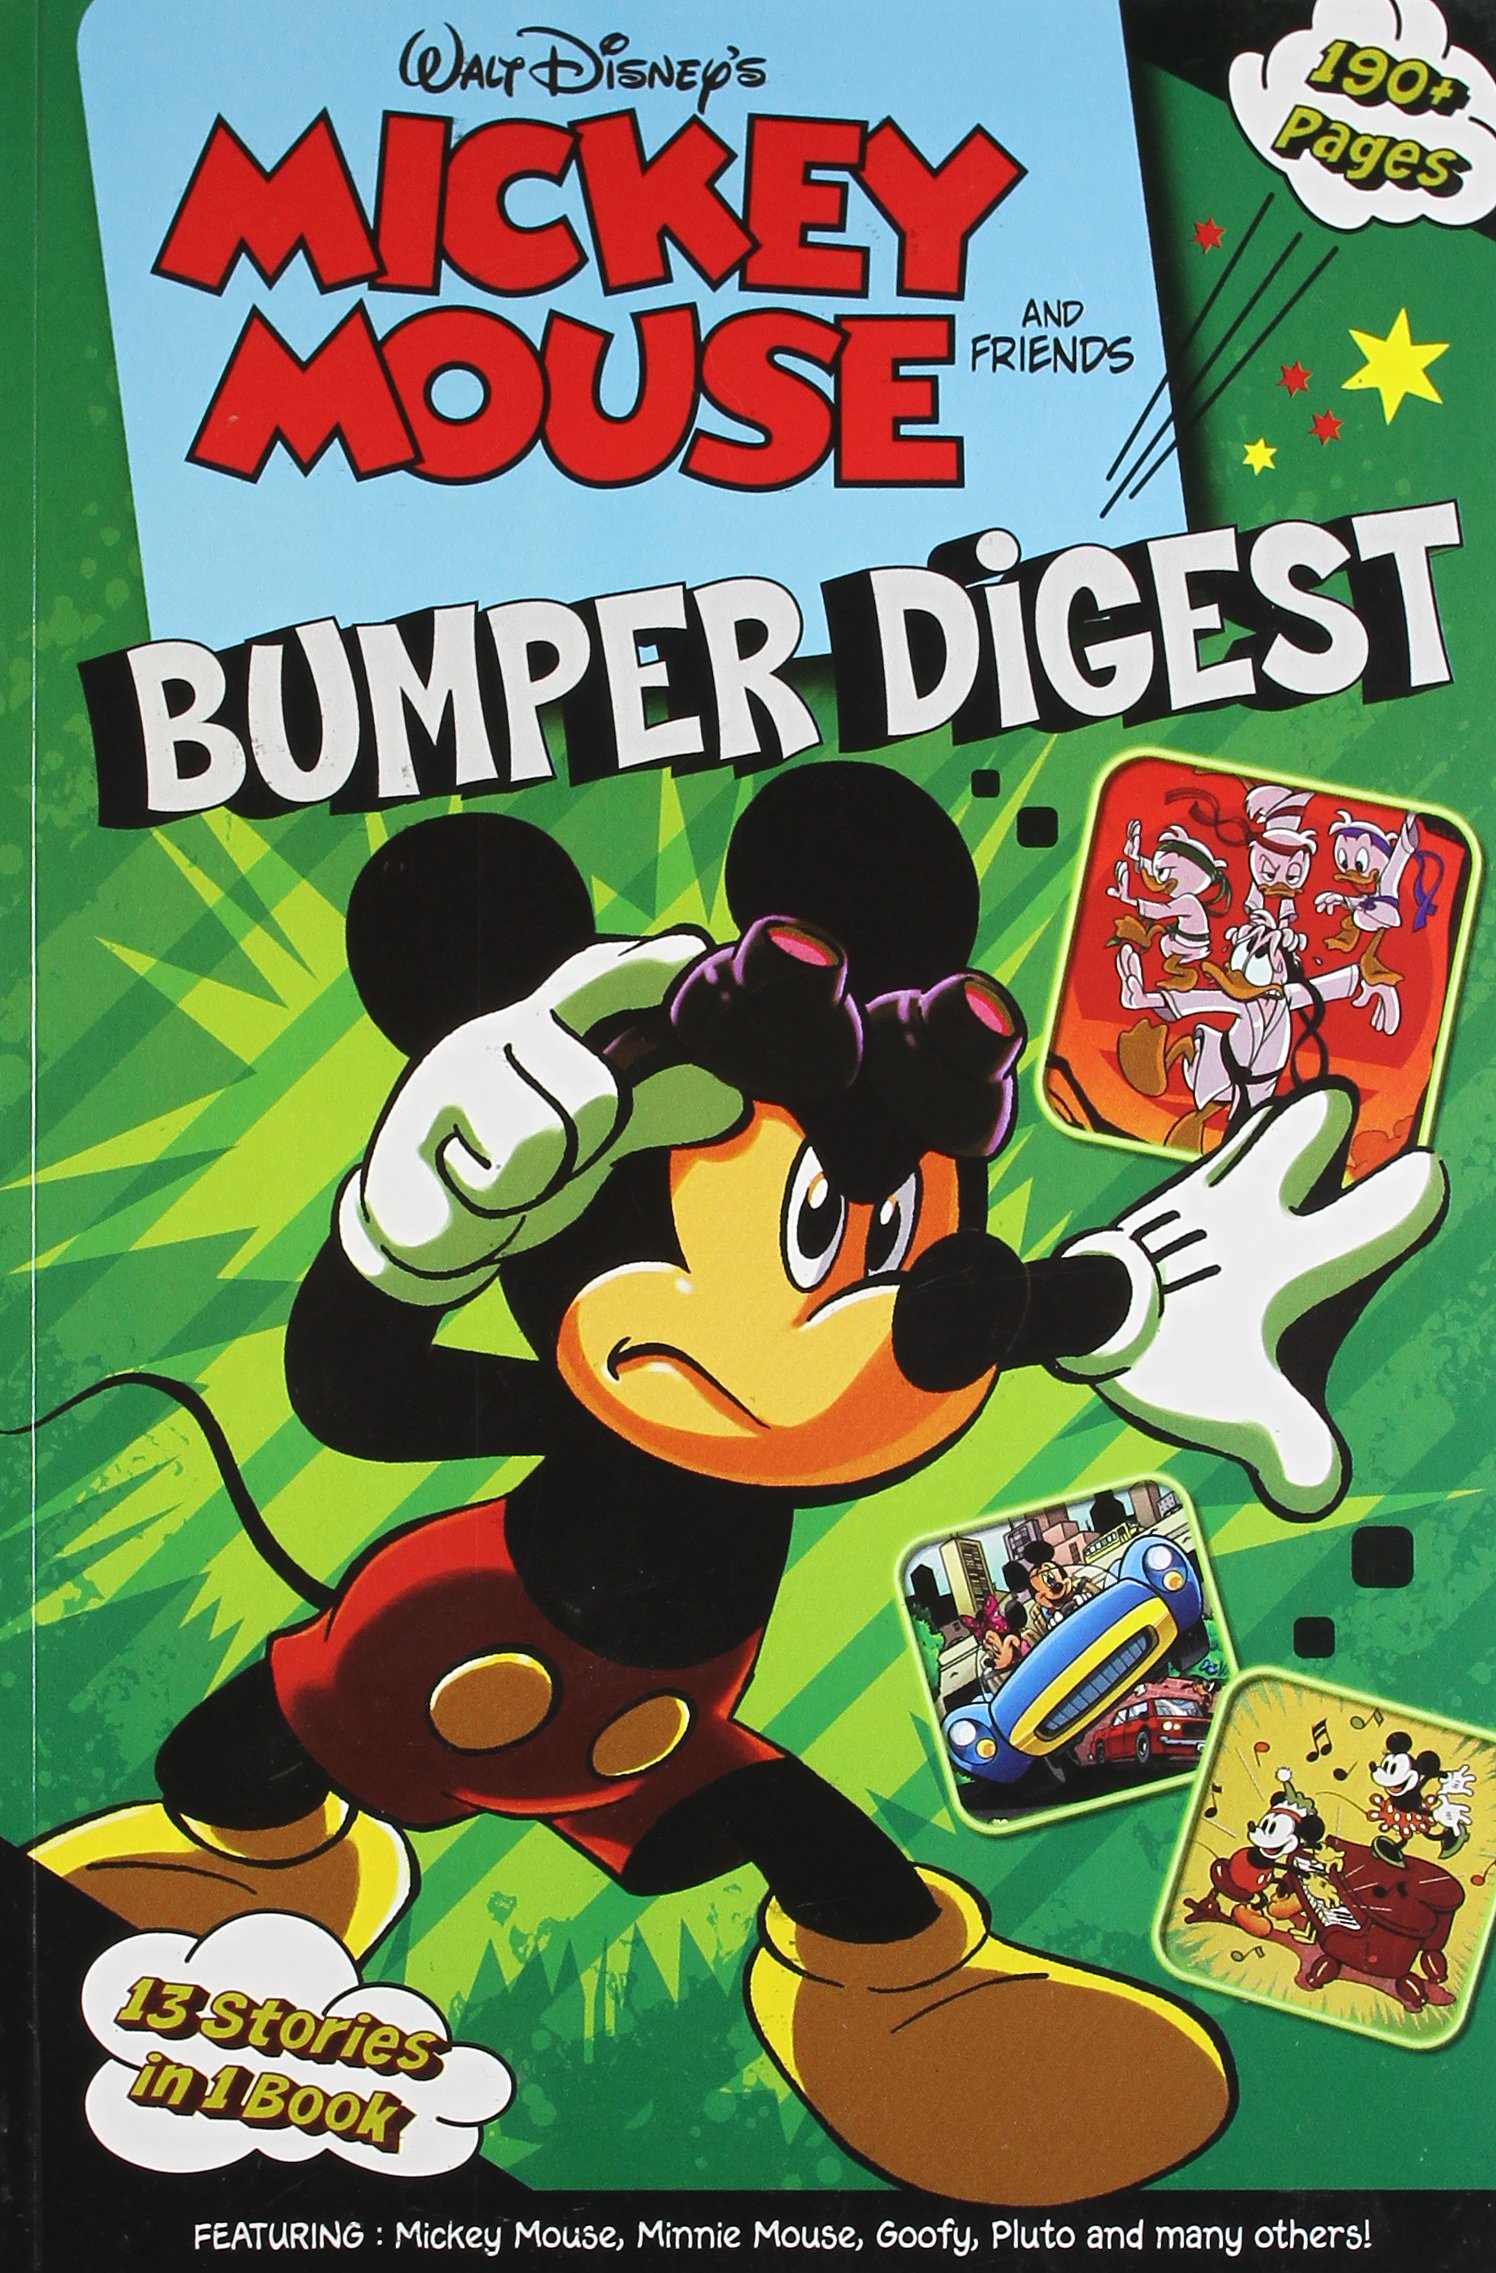 MICKEY MOUSE & FRIENDS : 13 STORIES IN 1 BOOK : BUMPER DIGEST  - Featuring Mickey Mouse, Minnie Mouse, Goofy, Pluto and many others !